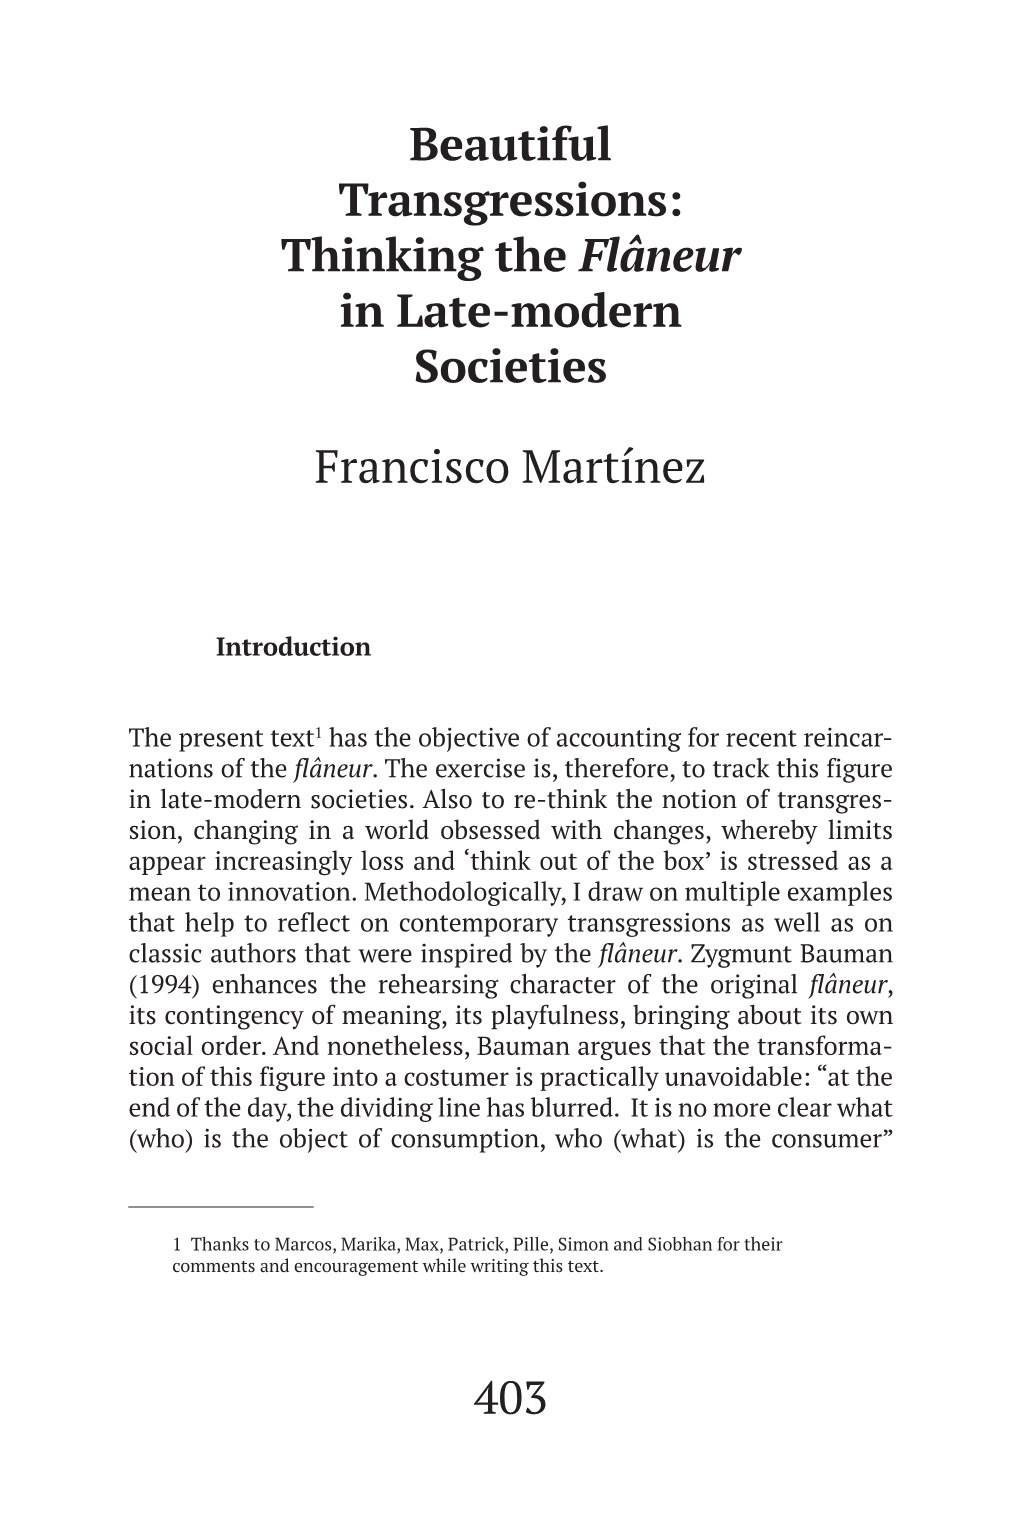 Thinking the Flâneur in Late-Modern Societies Francisco Martínez